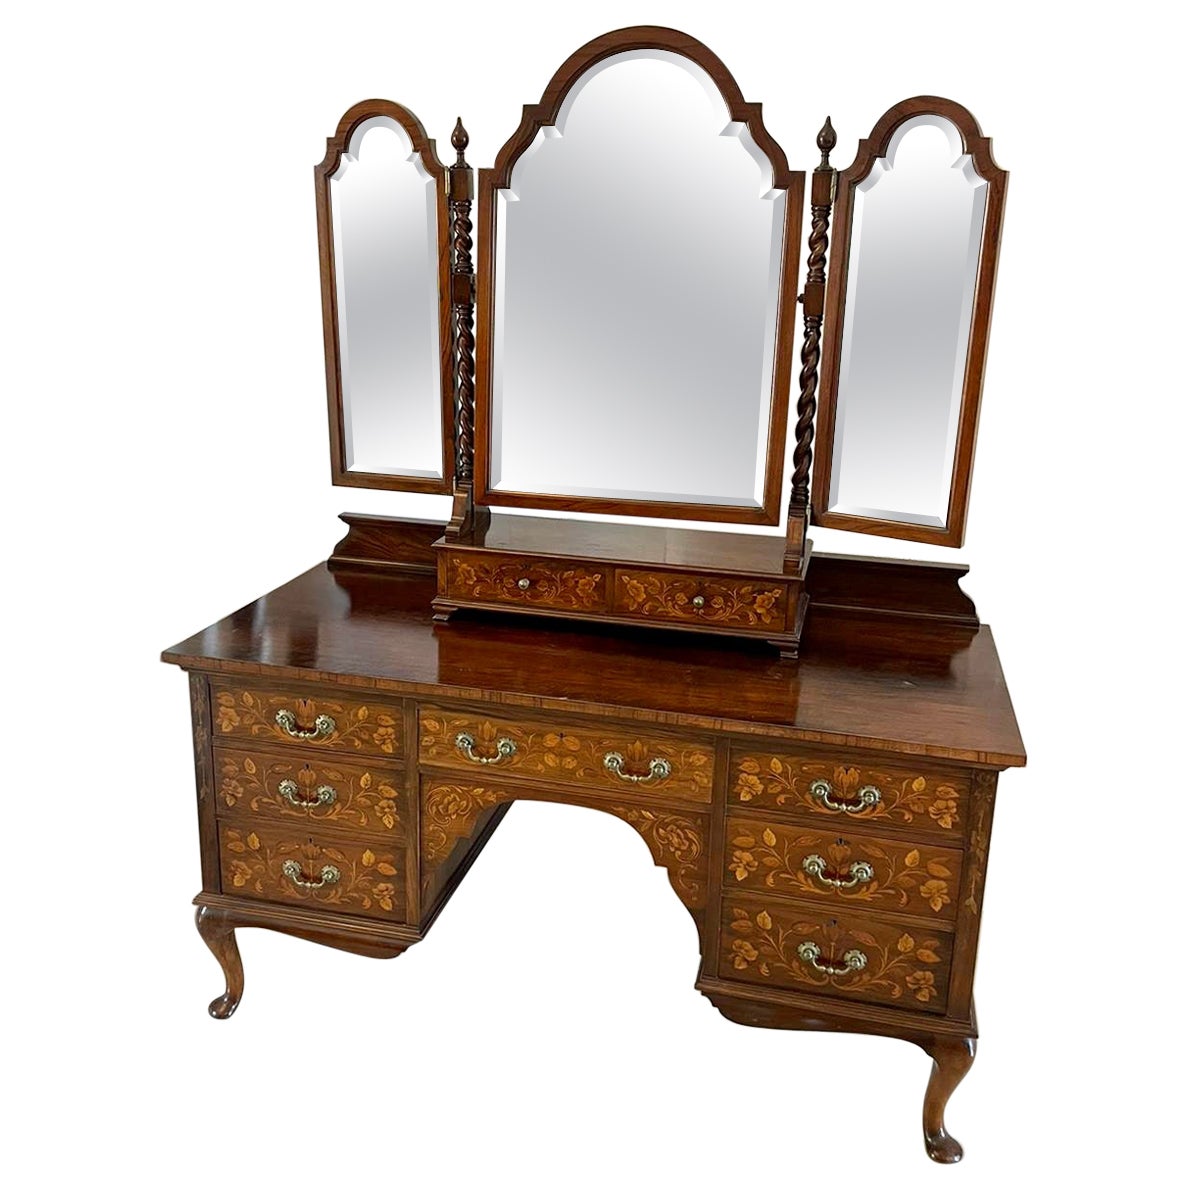 Outstanding Quality Antique Walnut Floral Marquetry Inlaid Dressing Table For Sale